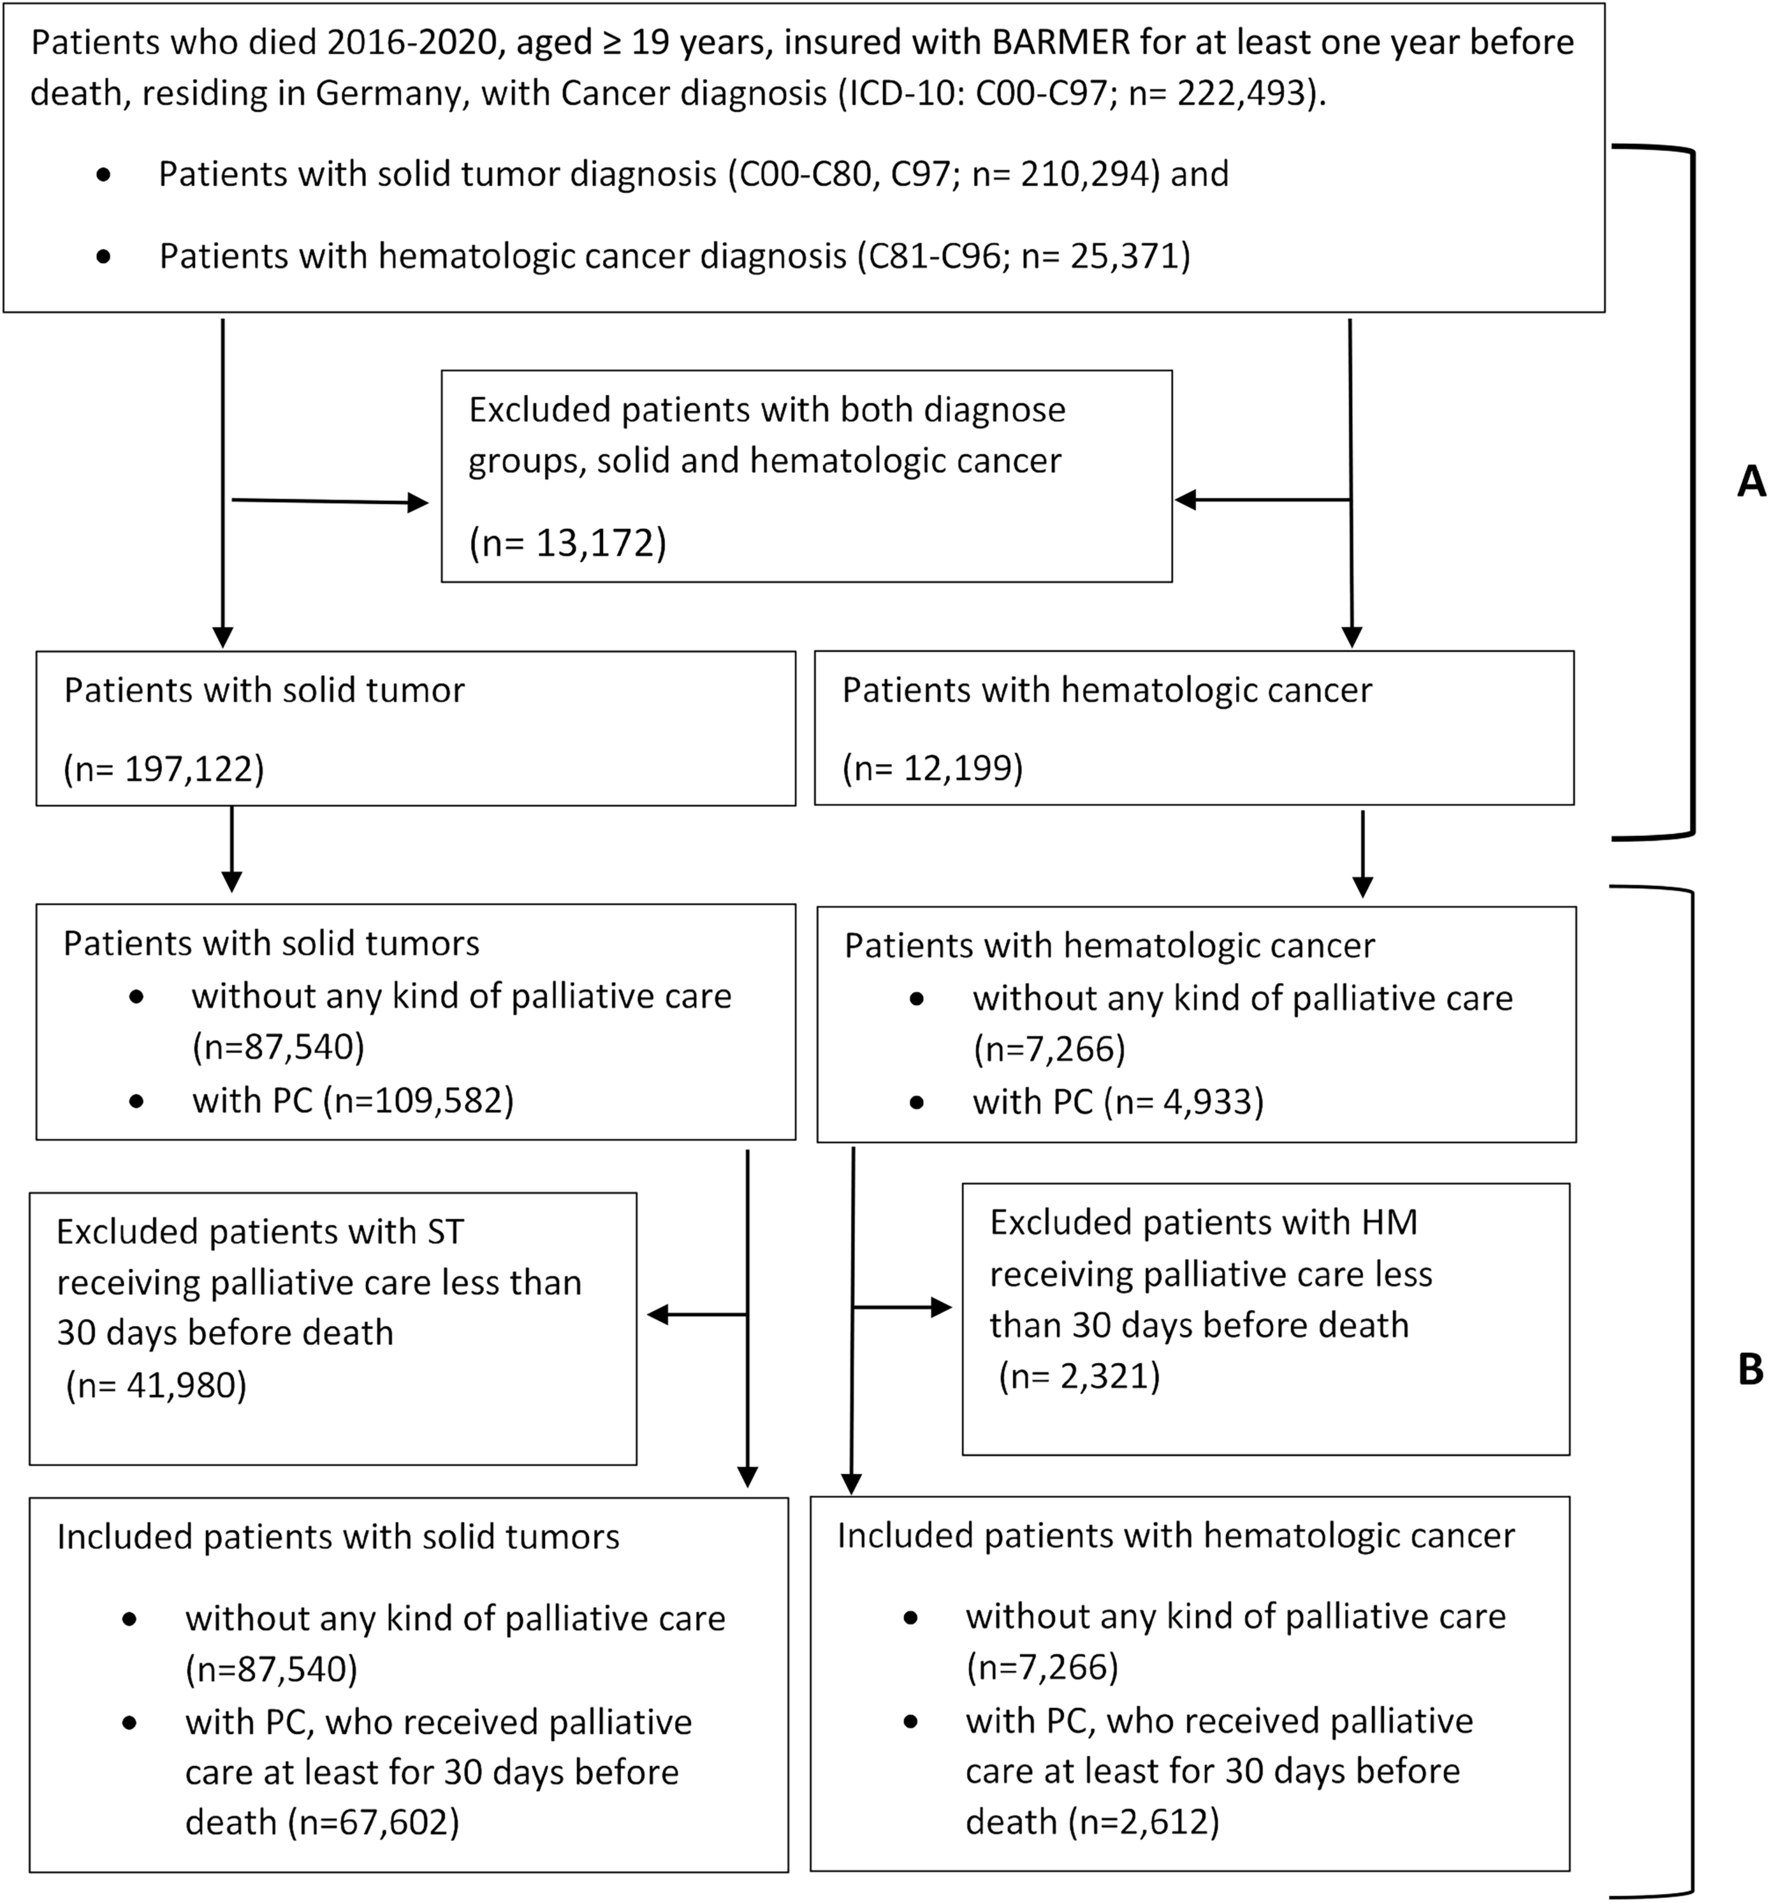 Utilization and quality of palliative care in patients with hematological and solid cancers: a population-based study